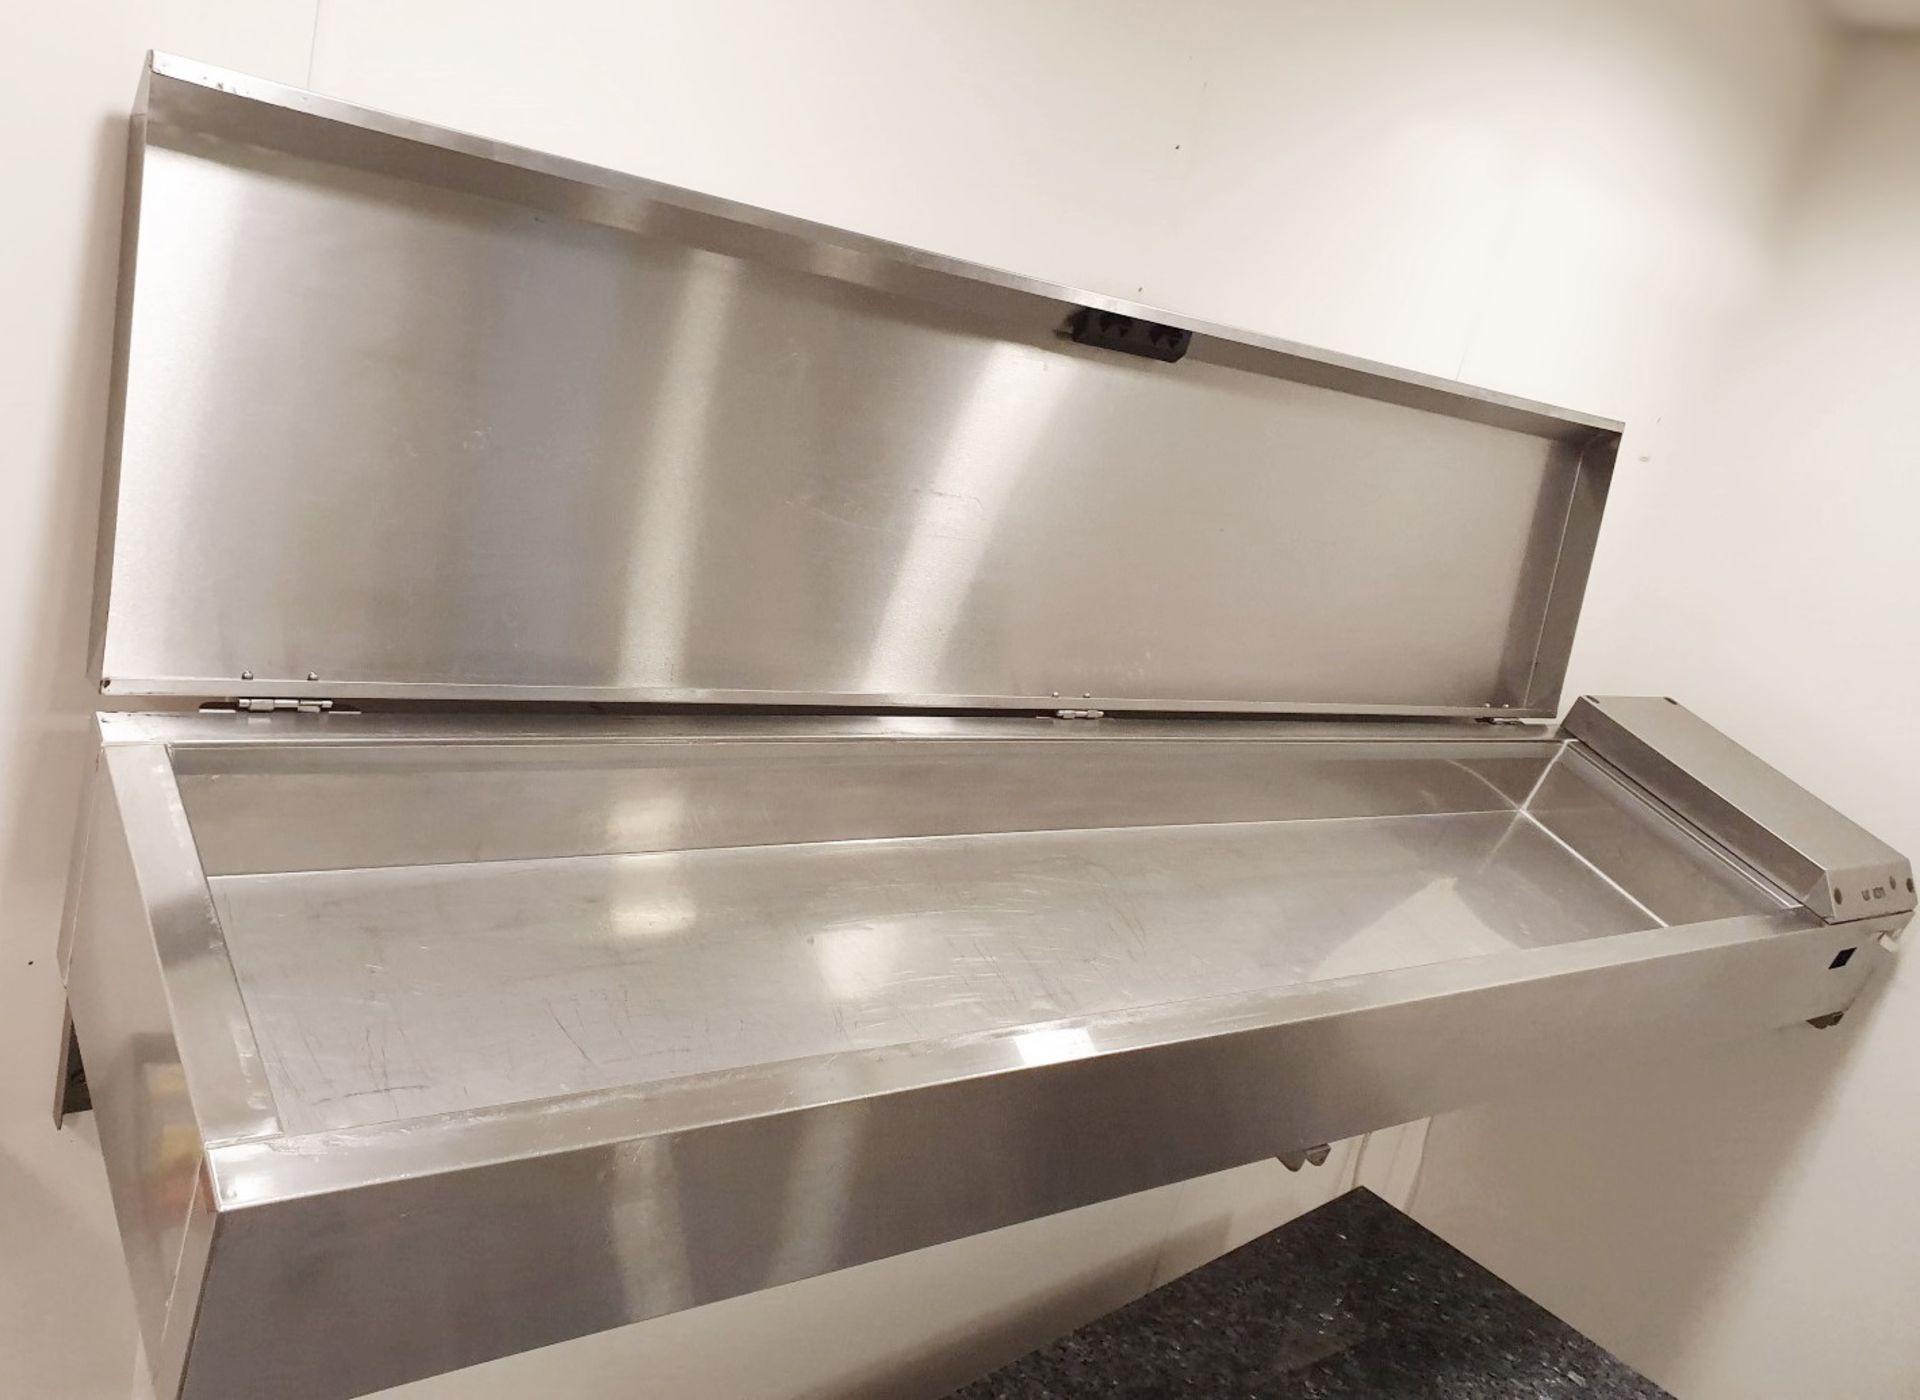 1 x Williams Refrigerated Preparation Well Pizza / Salad Topper - Stainless Steel Finish With Wall - Image 2 of 4